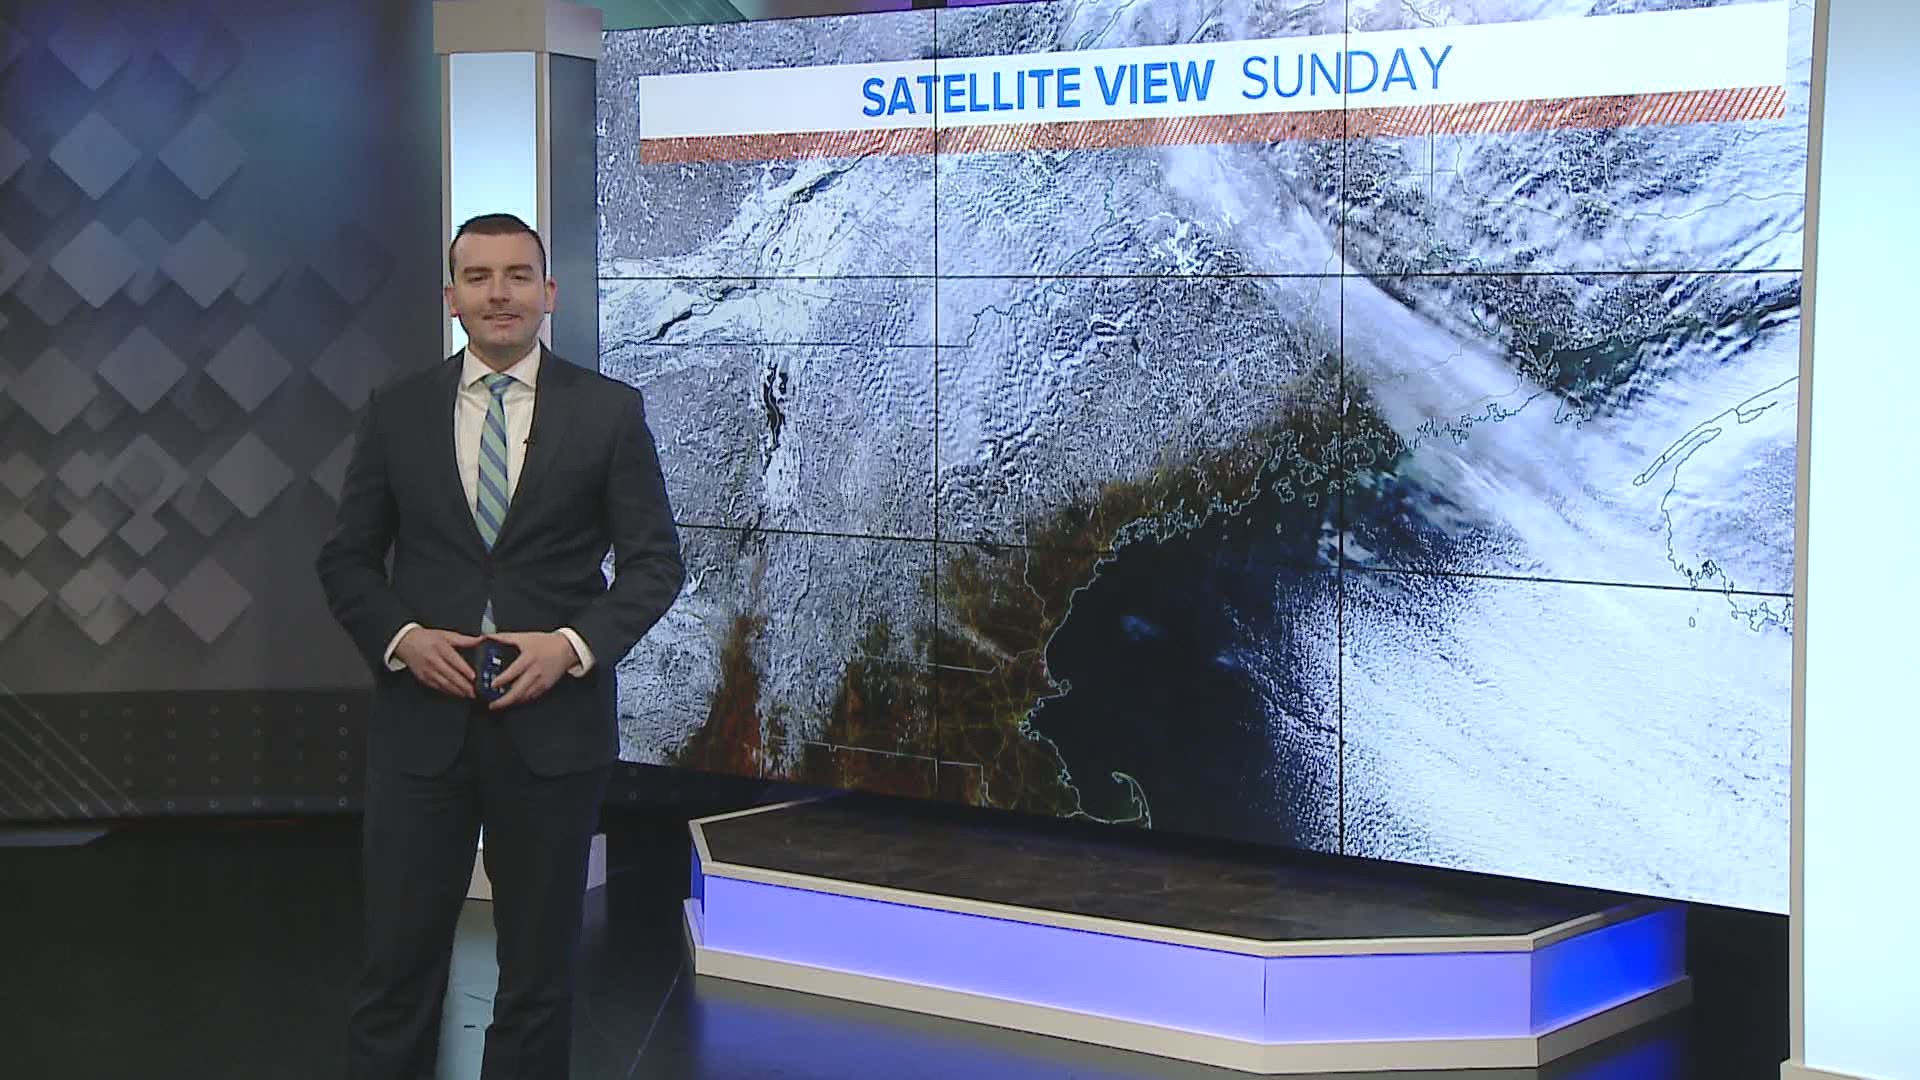 Meteorologist Ryan Breton explains how weather satellites capture images from space.